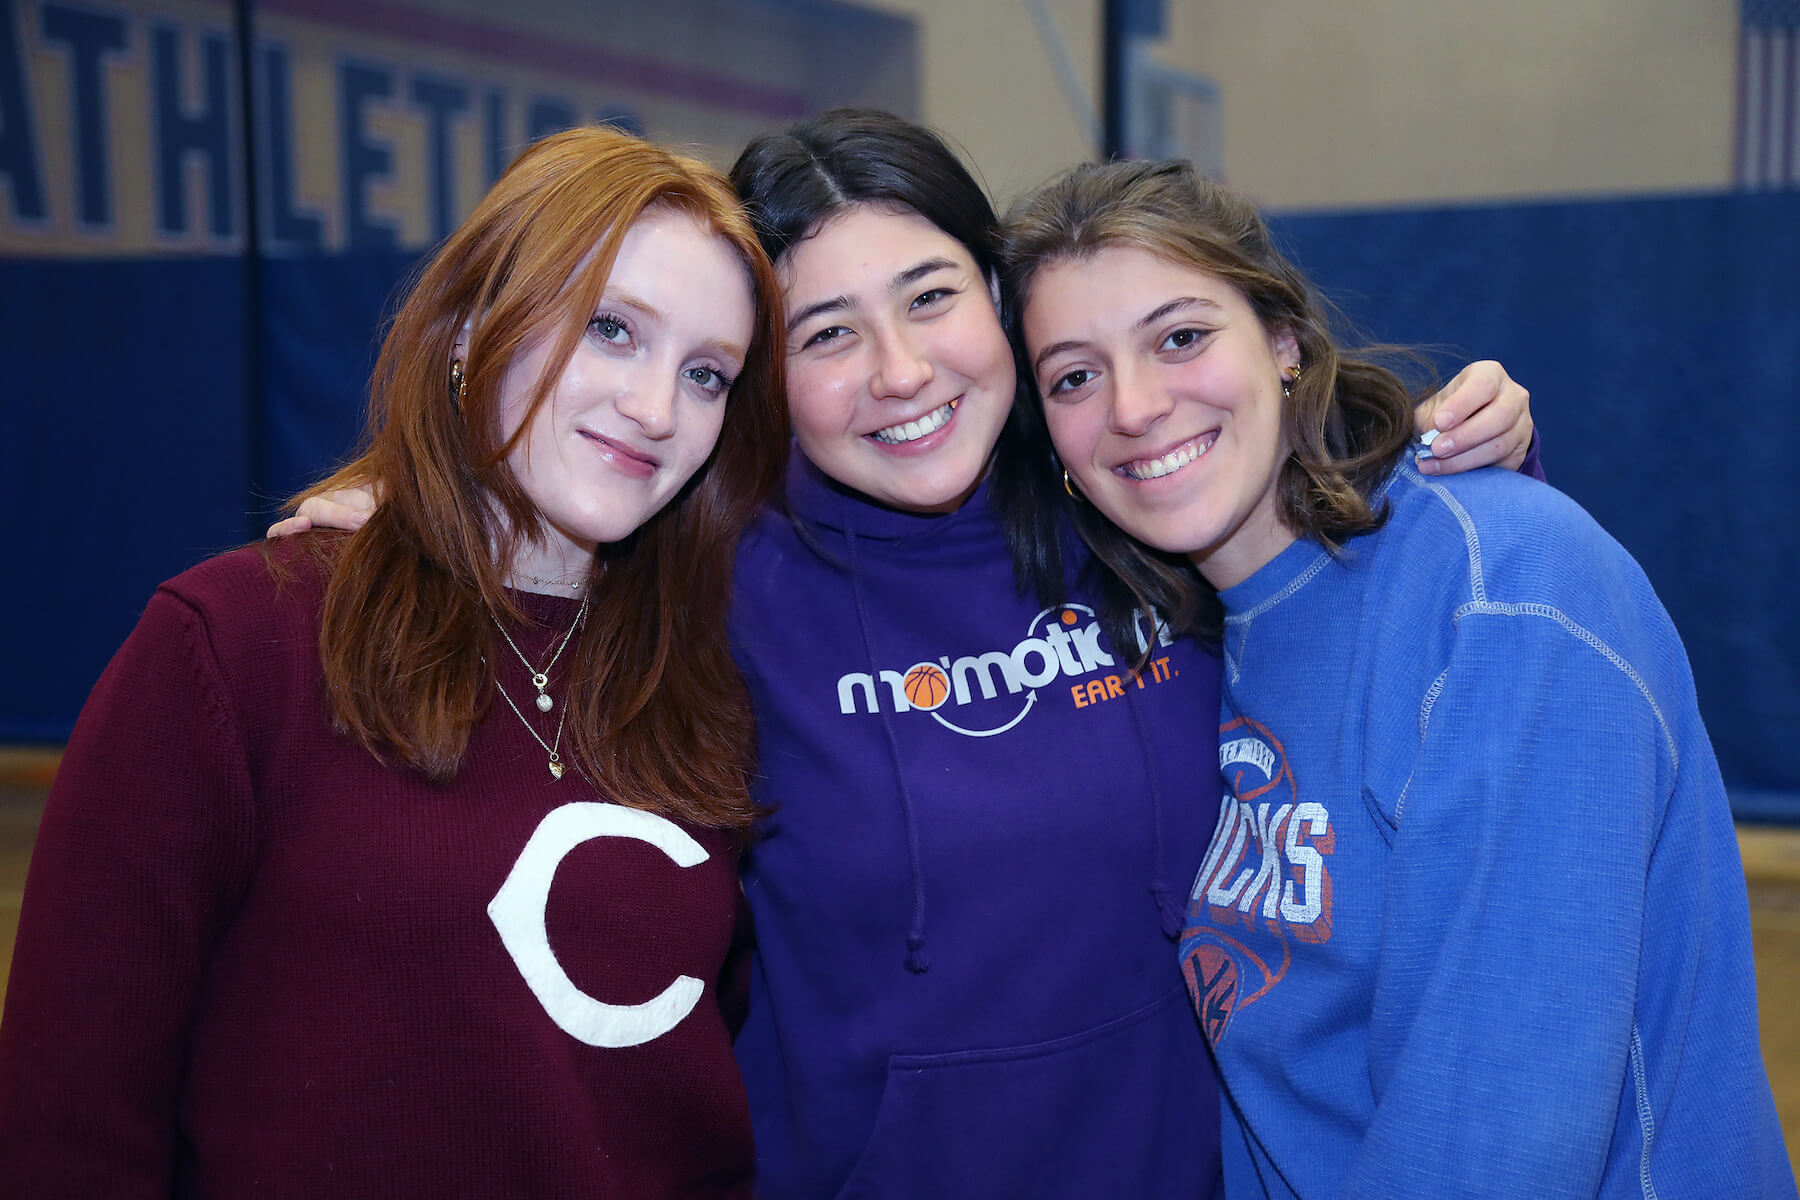 Ethical Culture Fieldston School Fieldston three Upper students stand together smiling